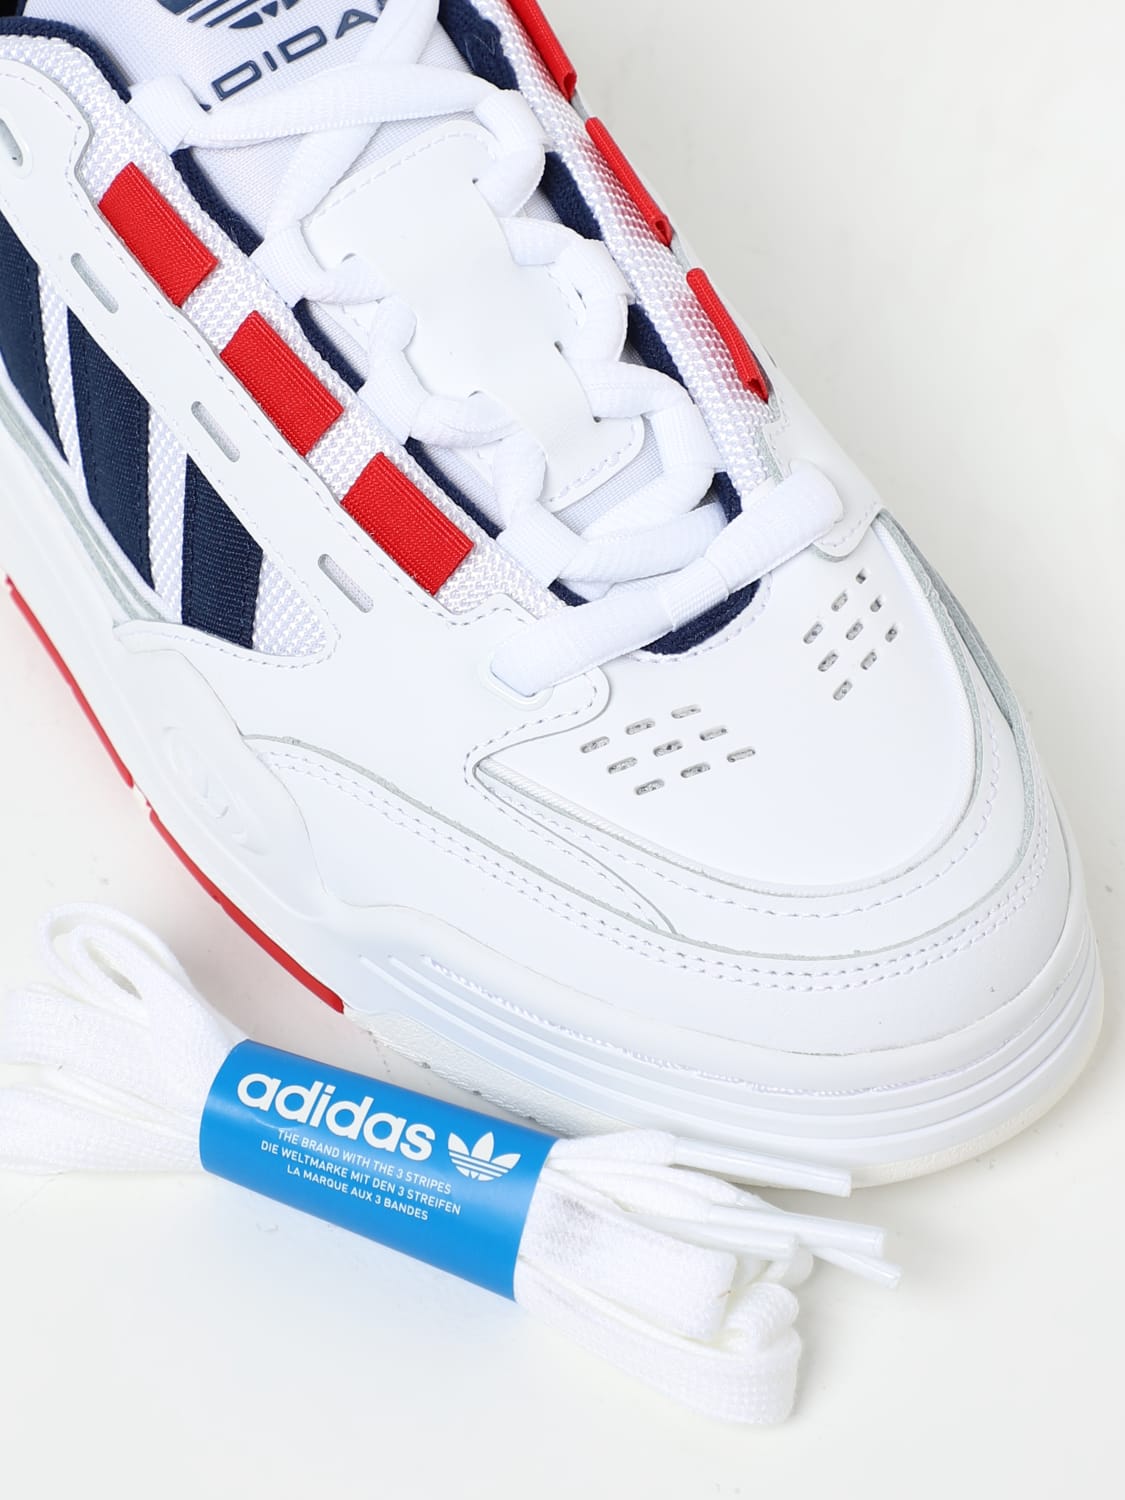 ADIDAS ORIGINALS: ADI2000 at online in Originals sneakers and leather sneakers mesh ID2103 - Adidas White 